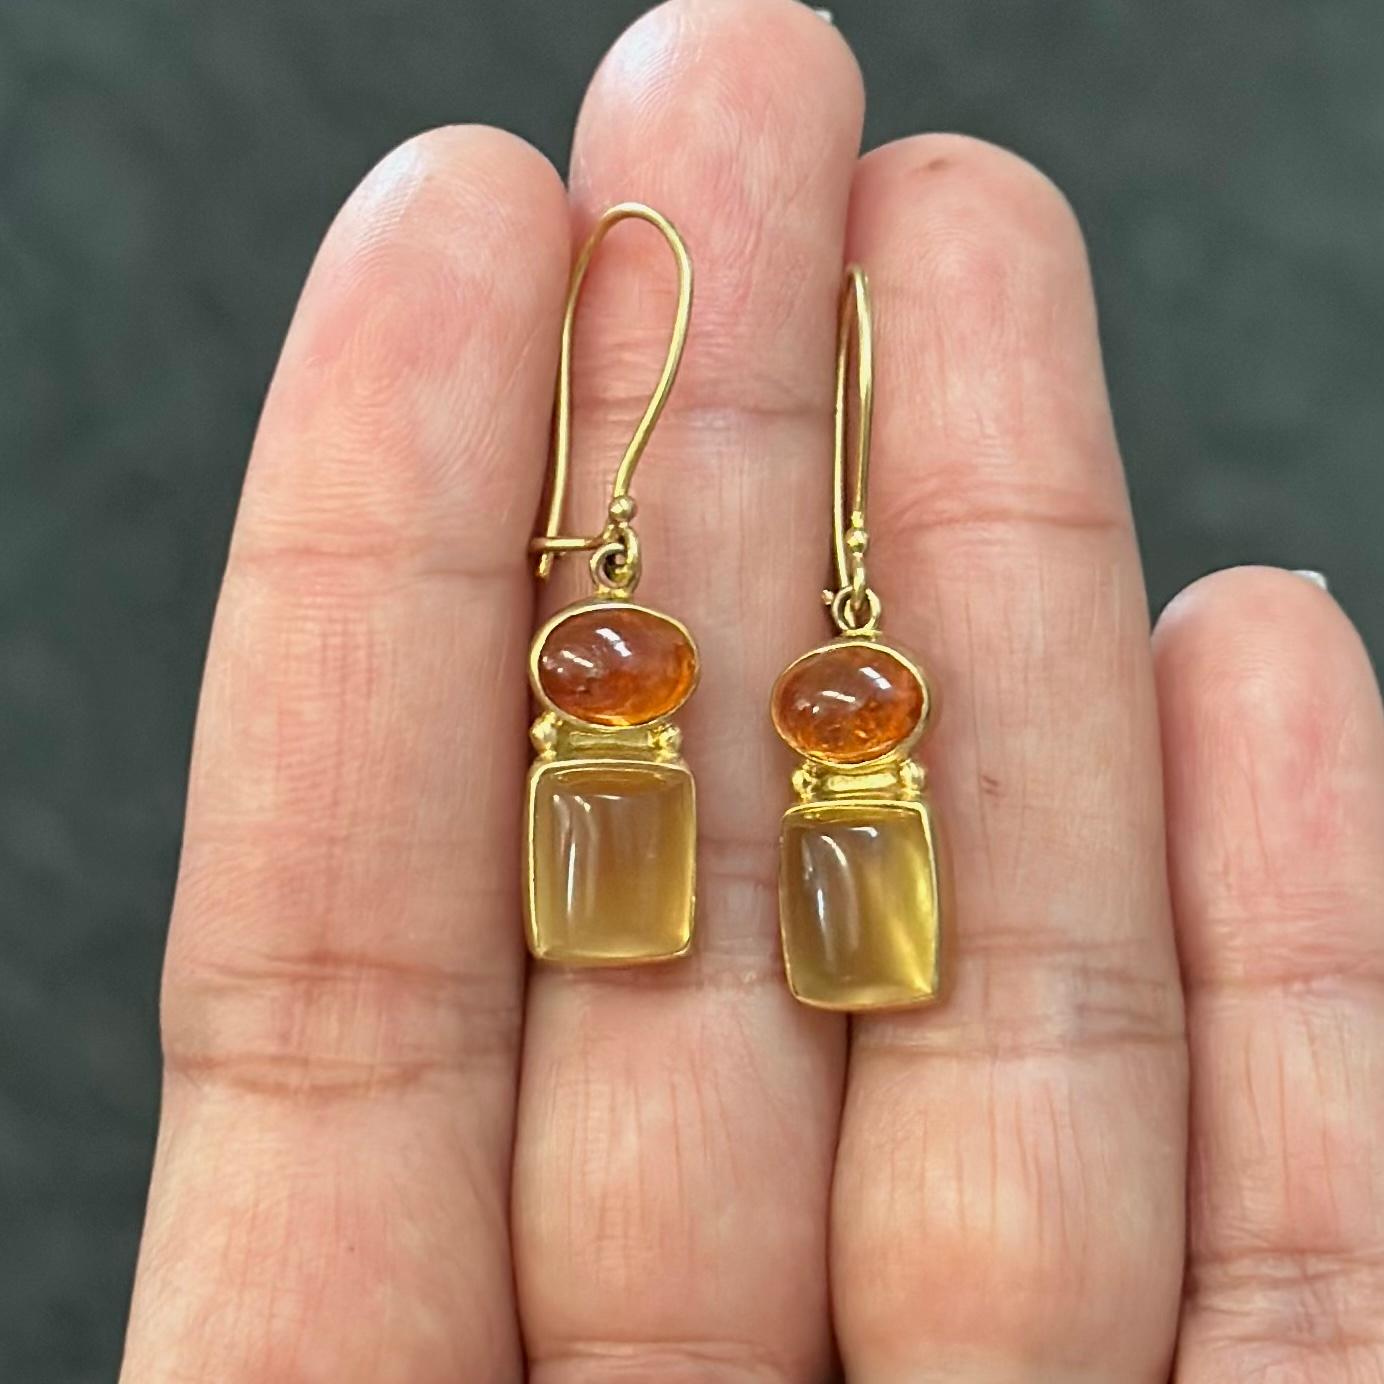 11.3 Carats Yellow Beryl Spessartine 18k Gold Wire Earrings In New Condition For Sale In Soquel, CA